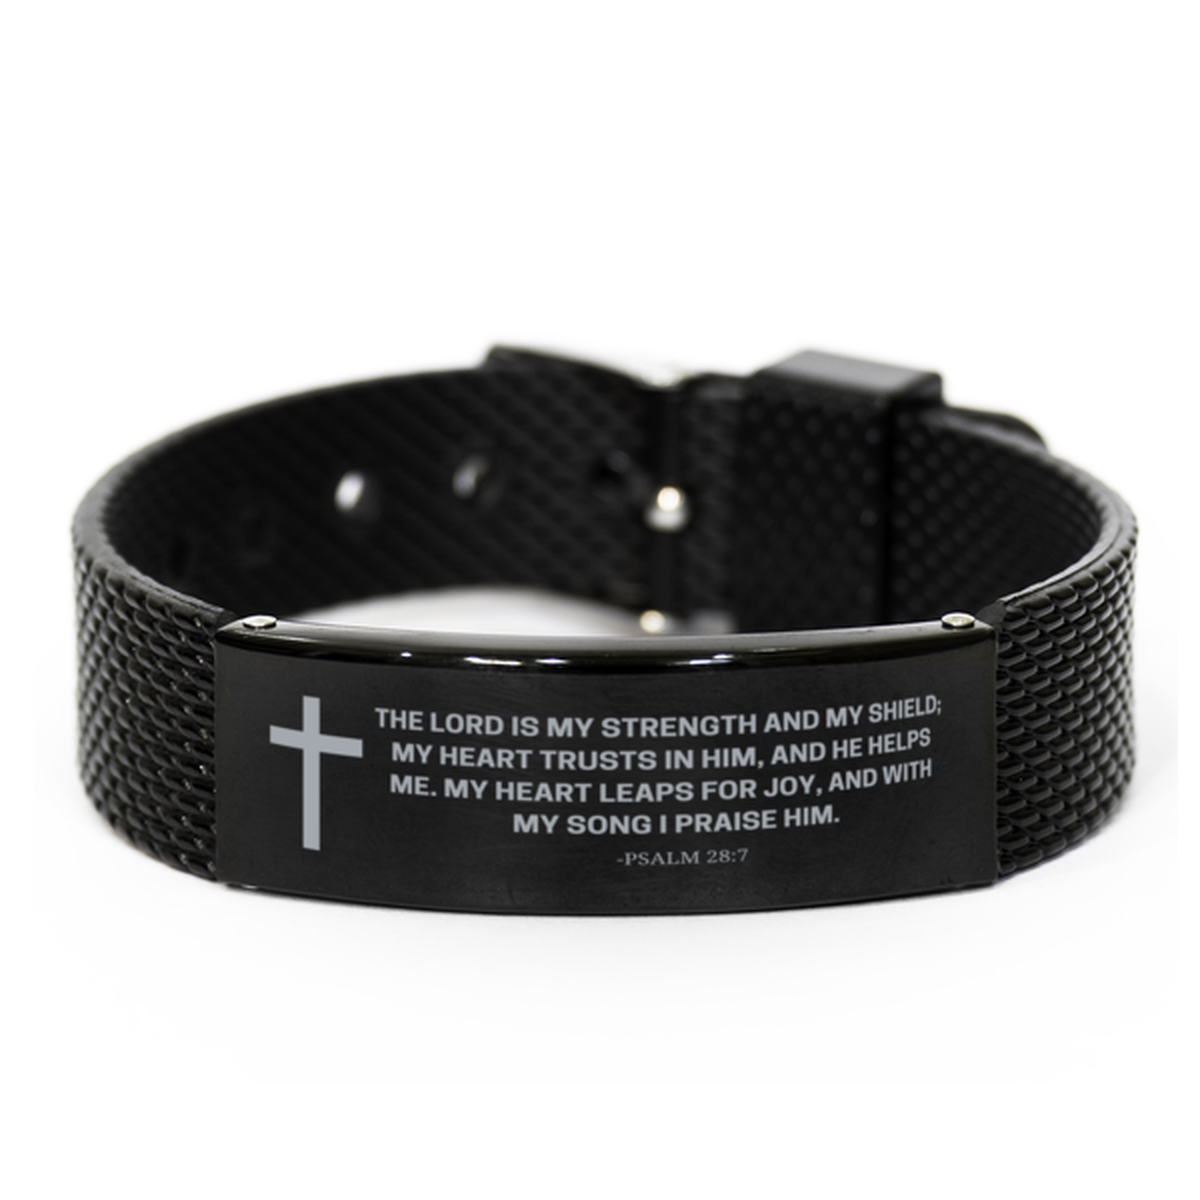 Baptism Gifts For Teenage Boys Girls, Christian Bible Verse Black Shark Mesh Bracelet, The Lord is my strength and my shield, Catholic Confirmation Gifts for Son, Godson, Grandson, Nephew